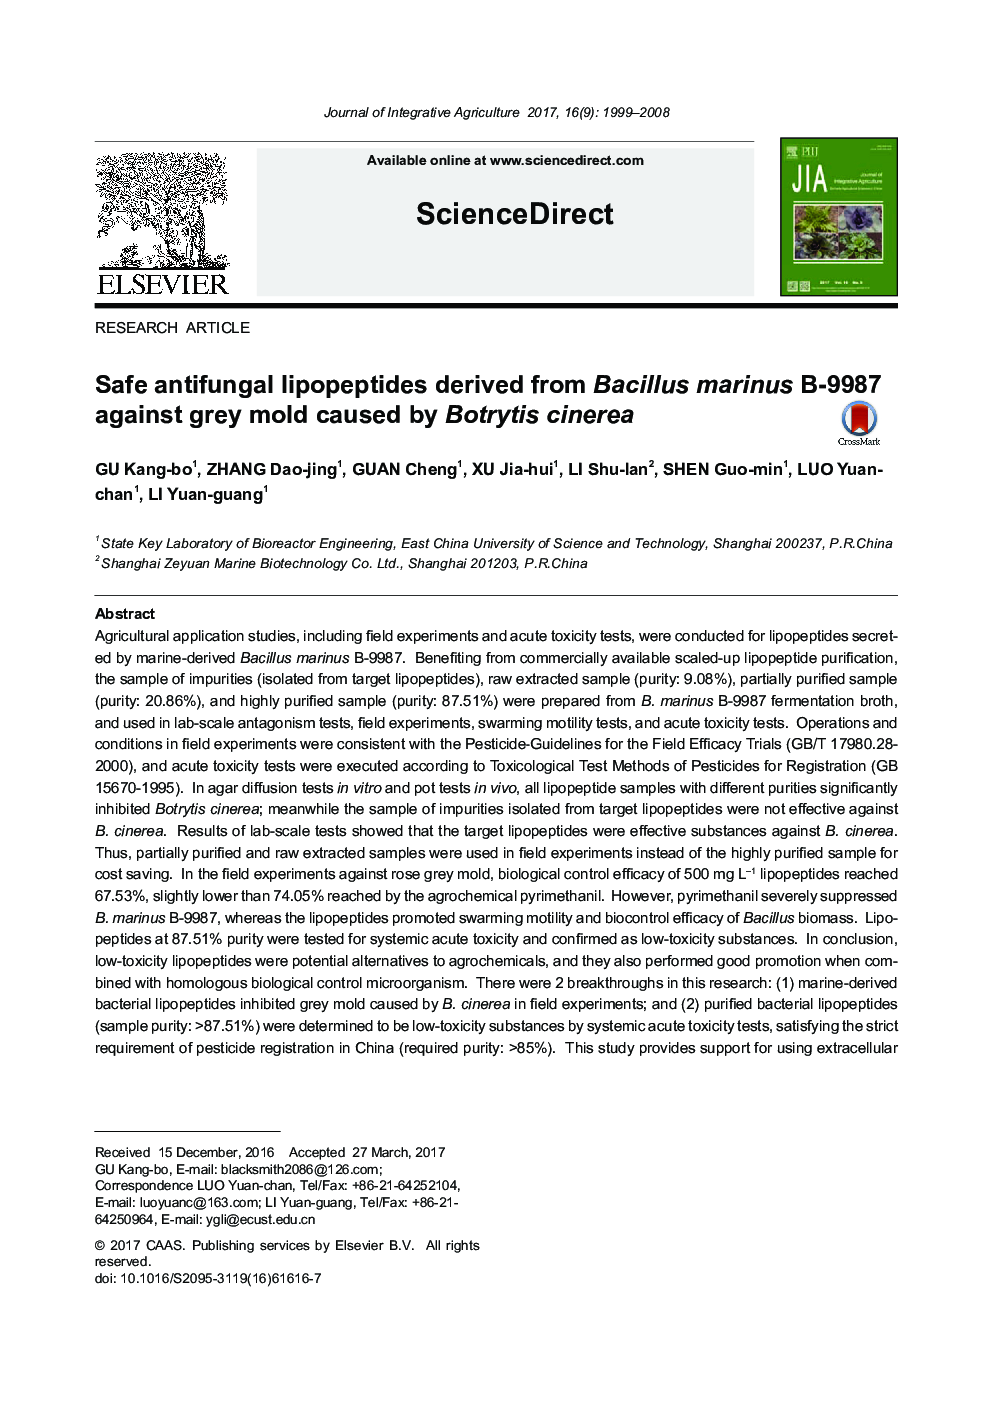 Safe antifungal lipopeptides derived from Bacillus marinus B-9987 against grey mold caused by Botrytis cinerea